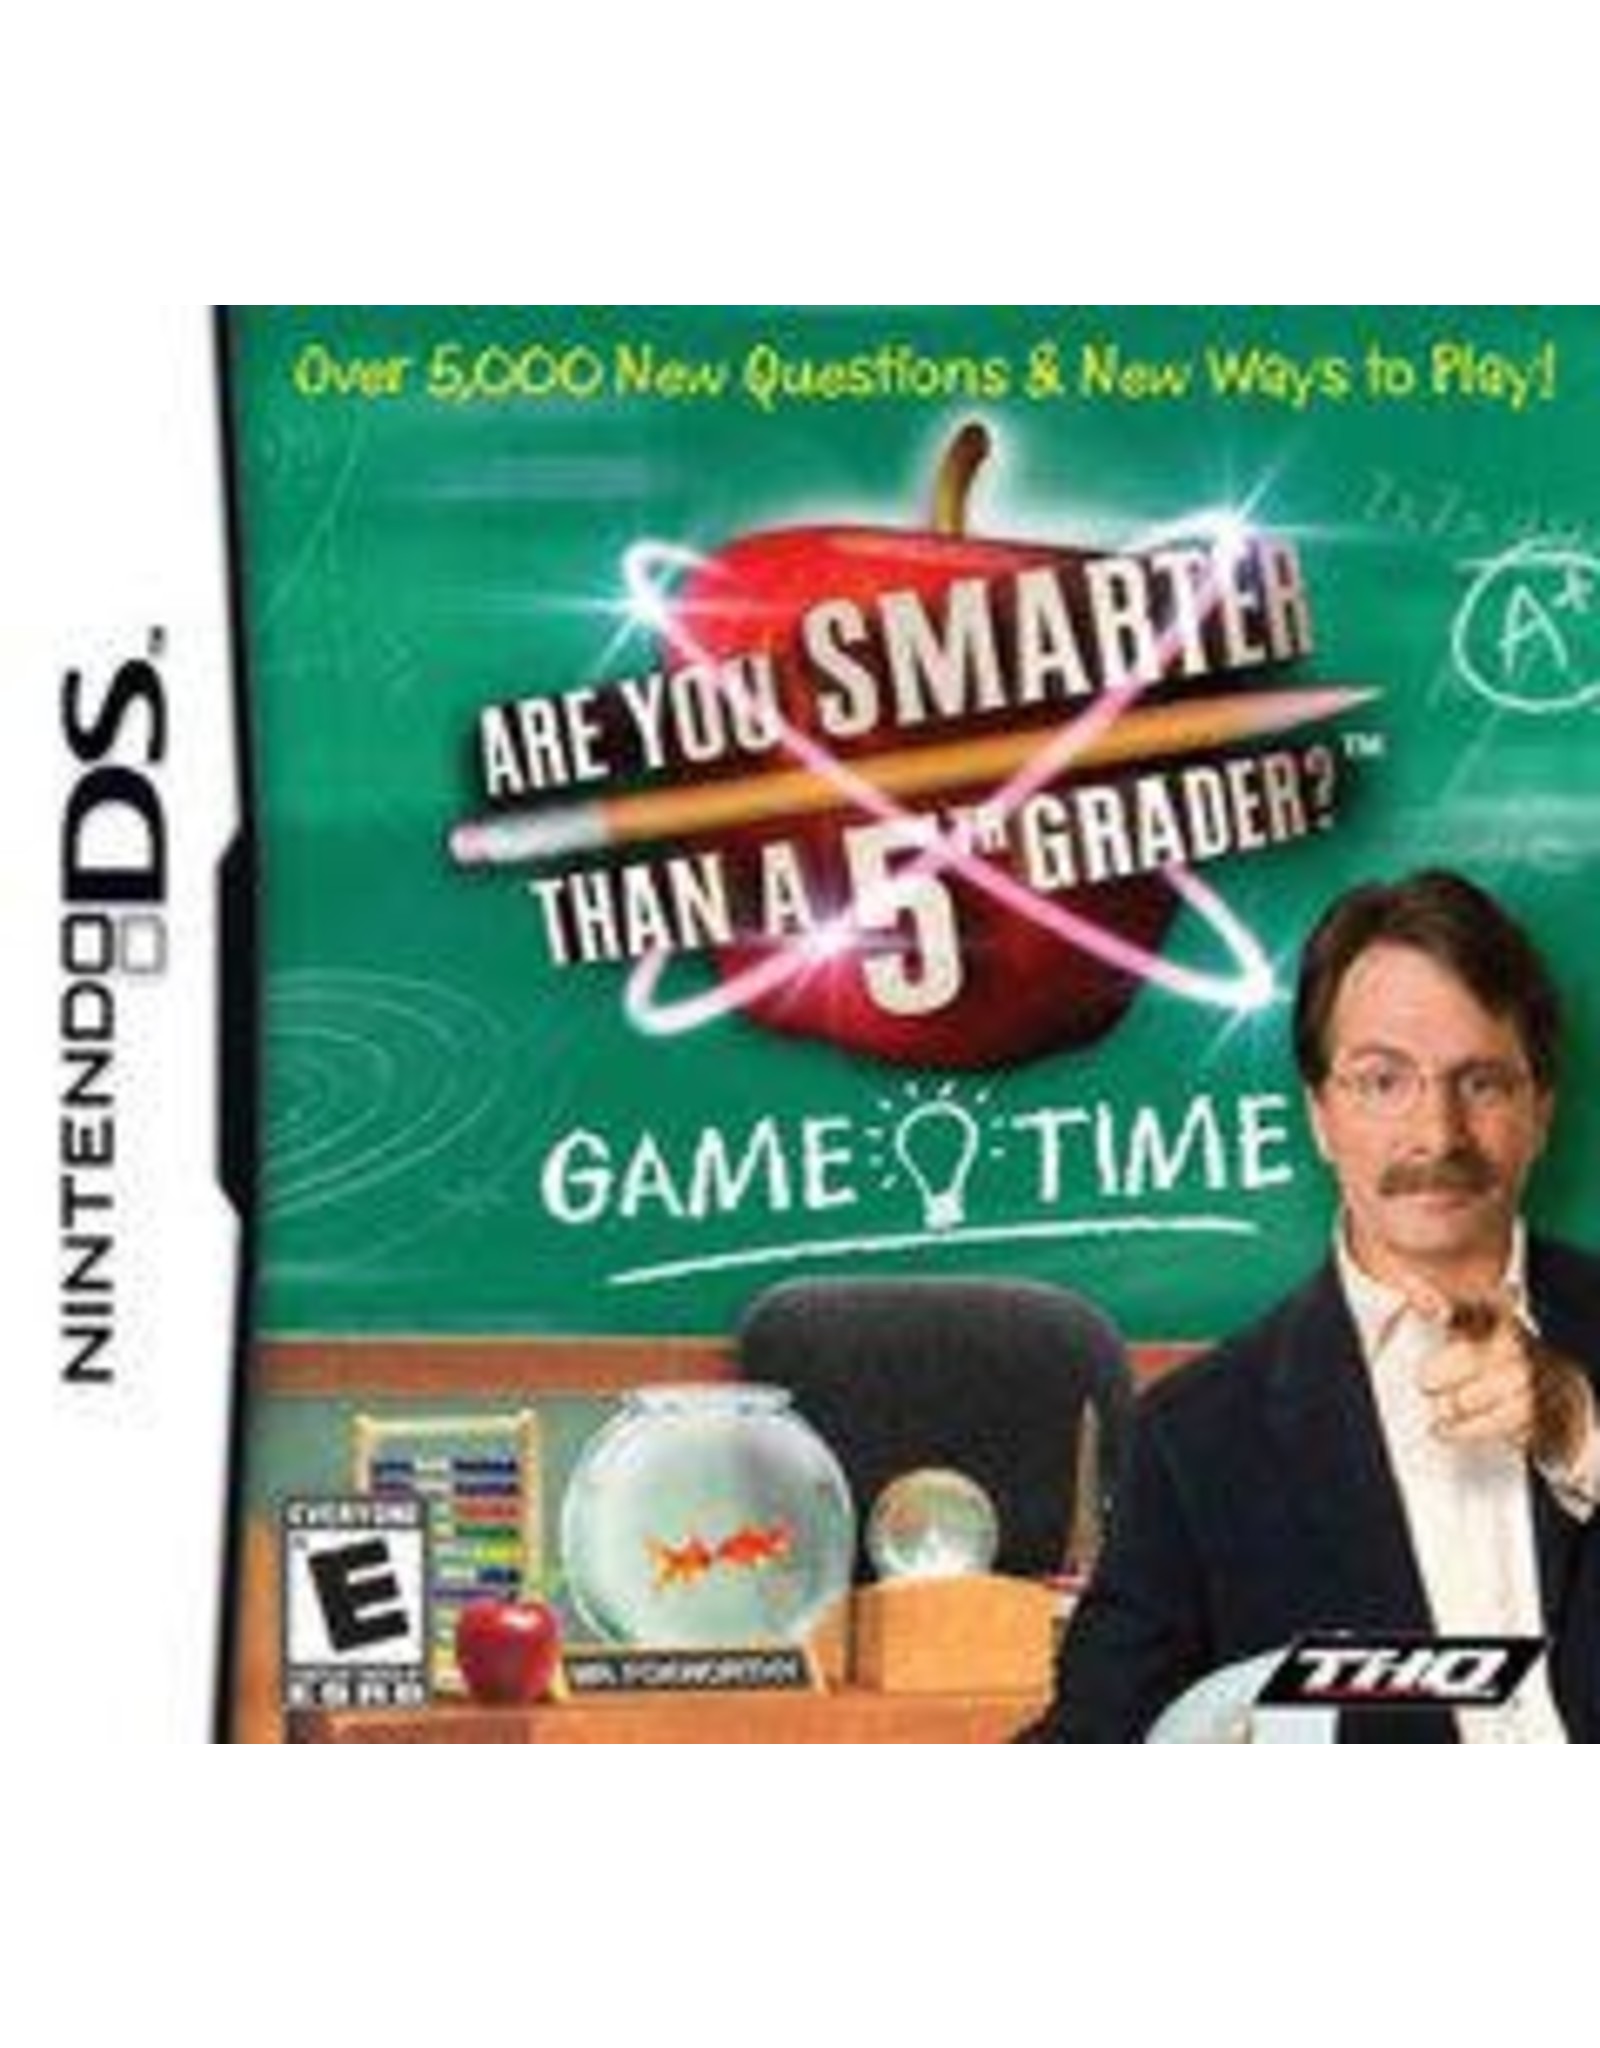 Nintendo DS Are You Smarter Than A 5th Grader? Game Time